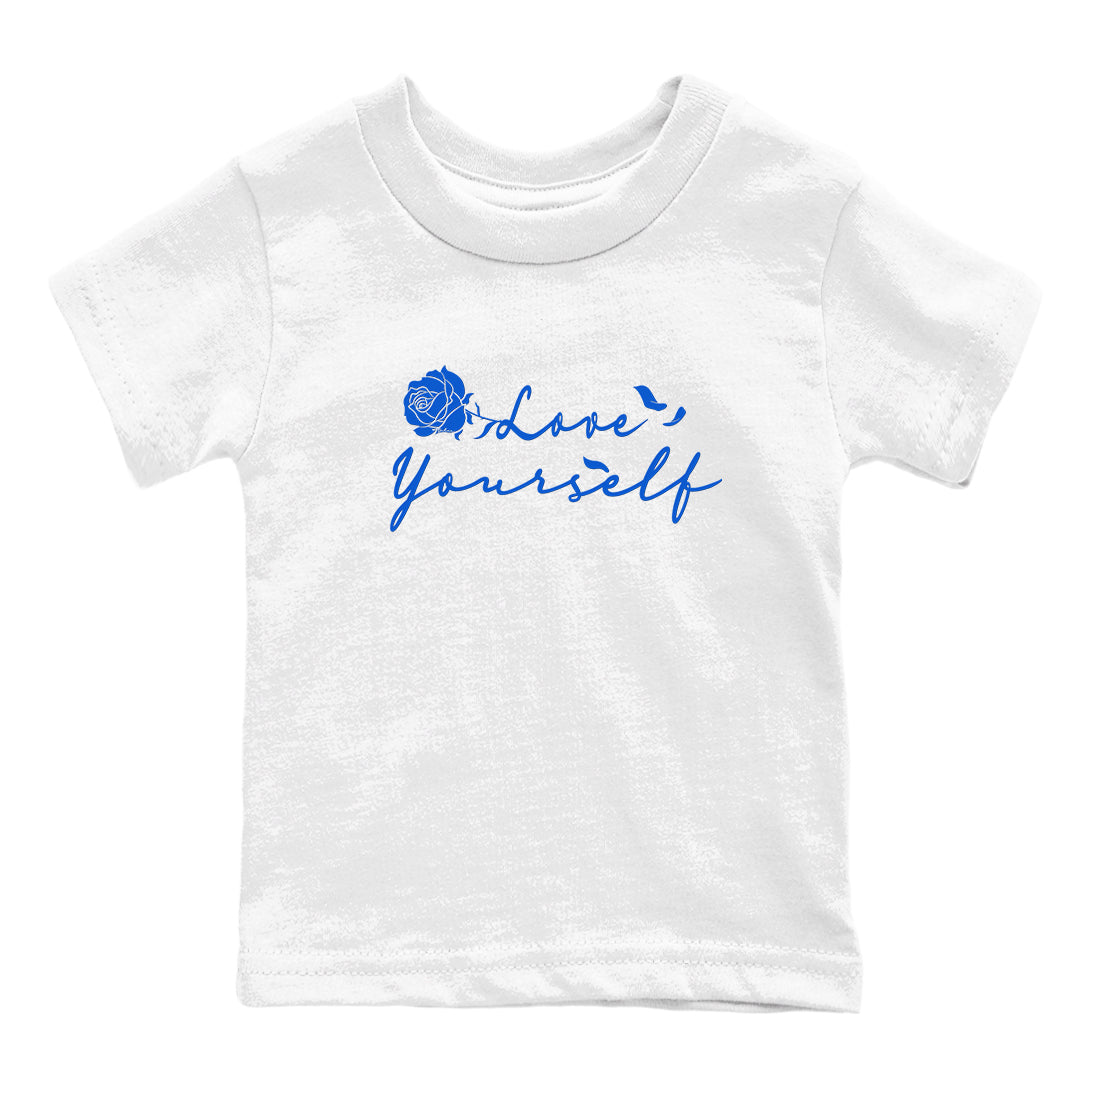 Yeezy Slide Azure shirts to match jordans Love Yourself sneaker match tees Yeezy Slide Azure SNRT Sneaker Tees streetwear brand Baby and Youth White 2 cotton tee